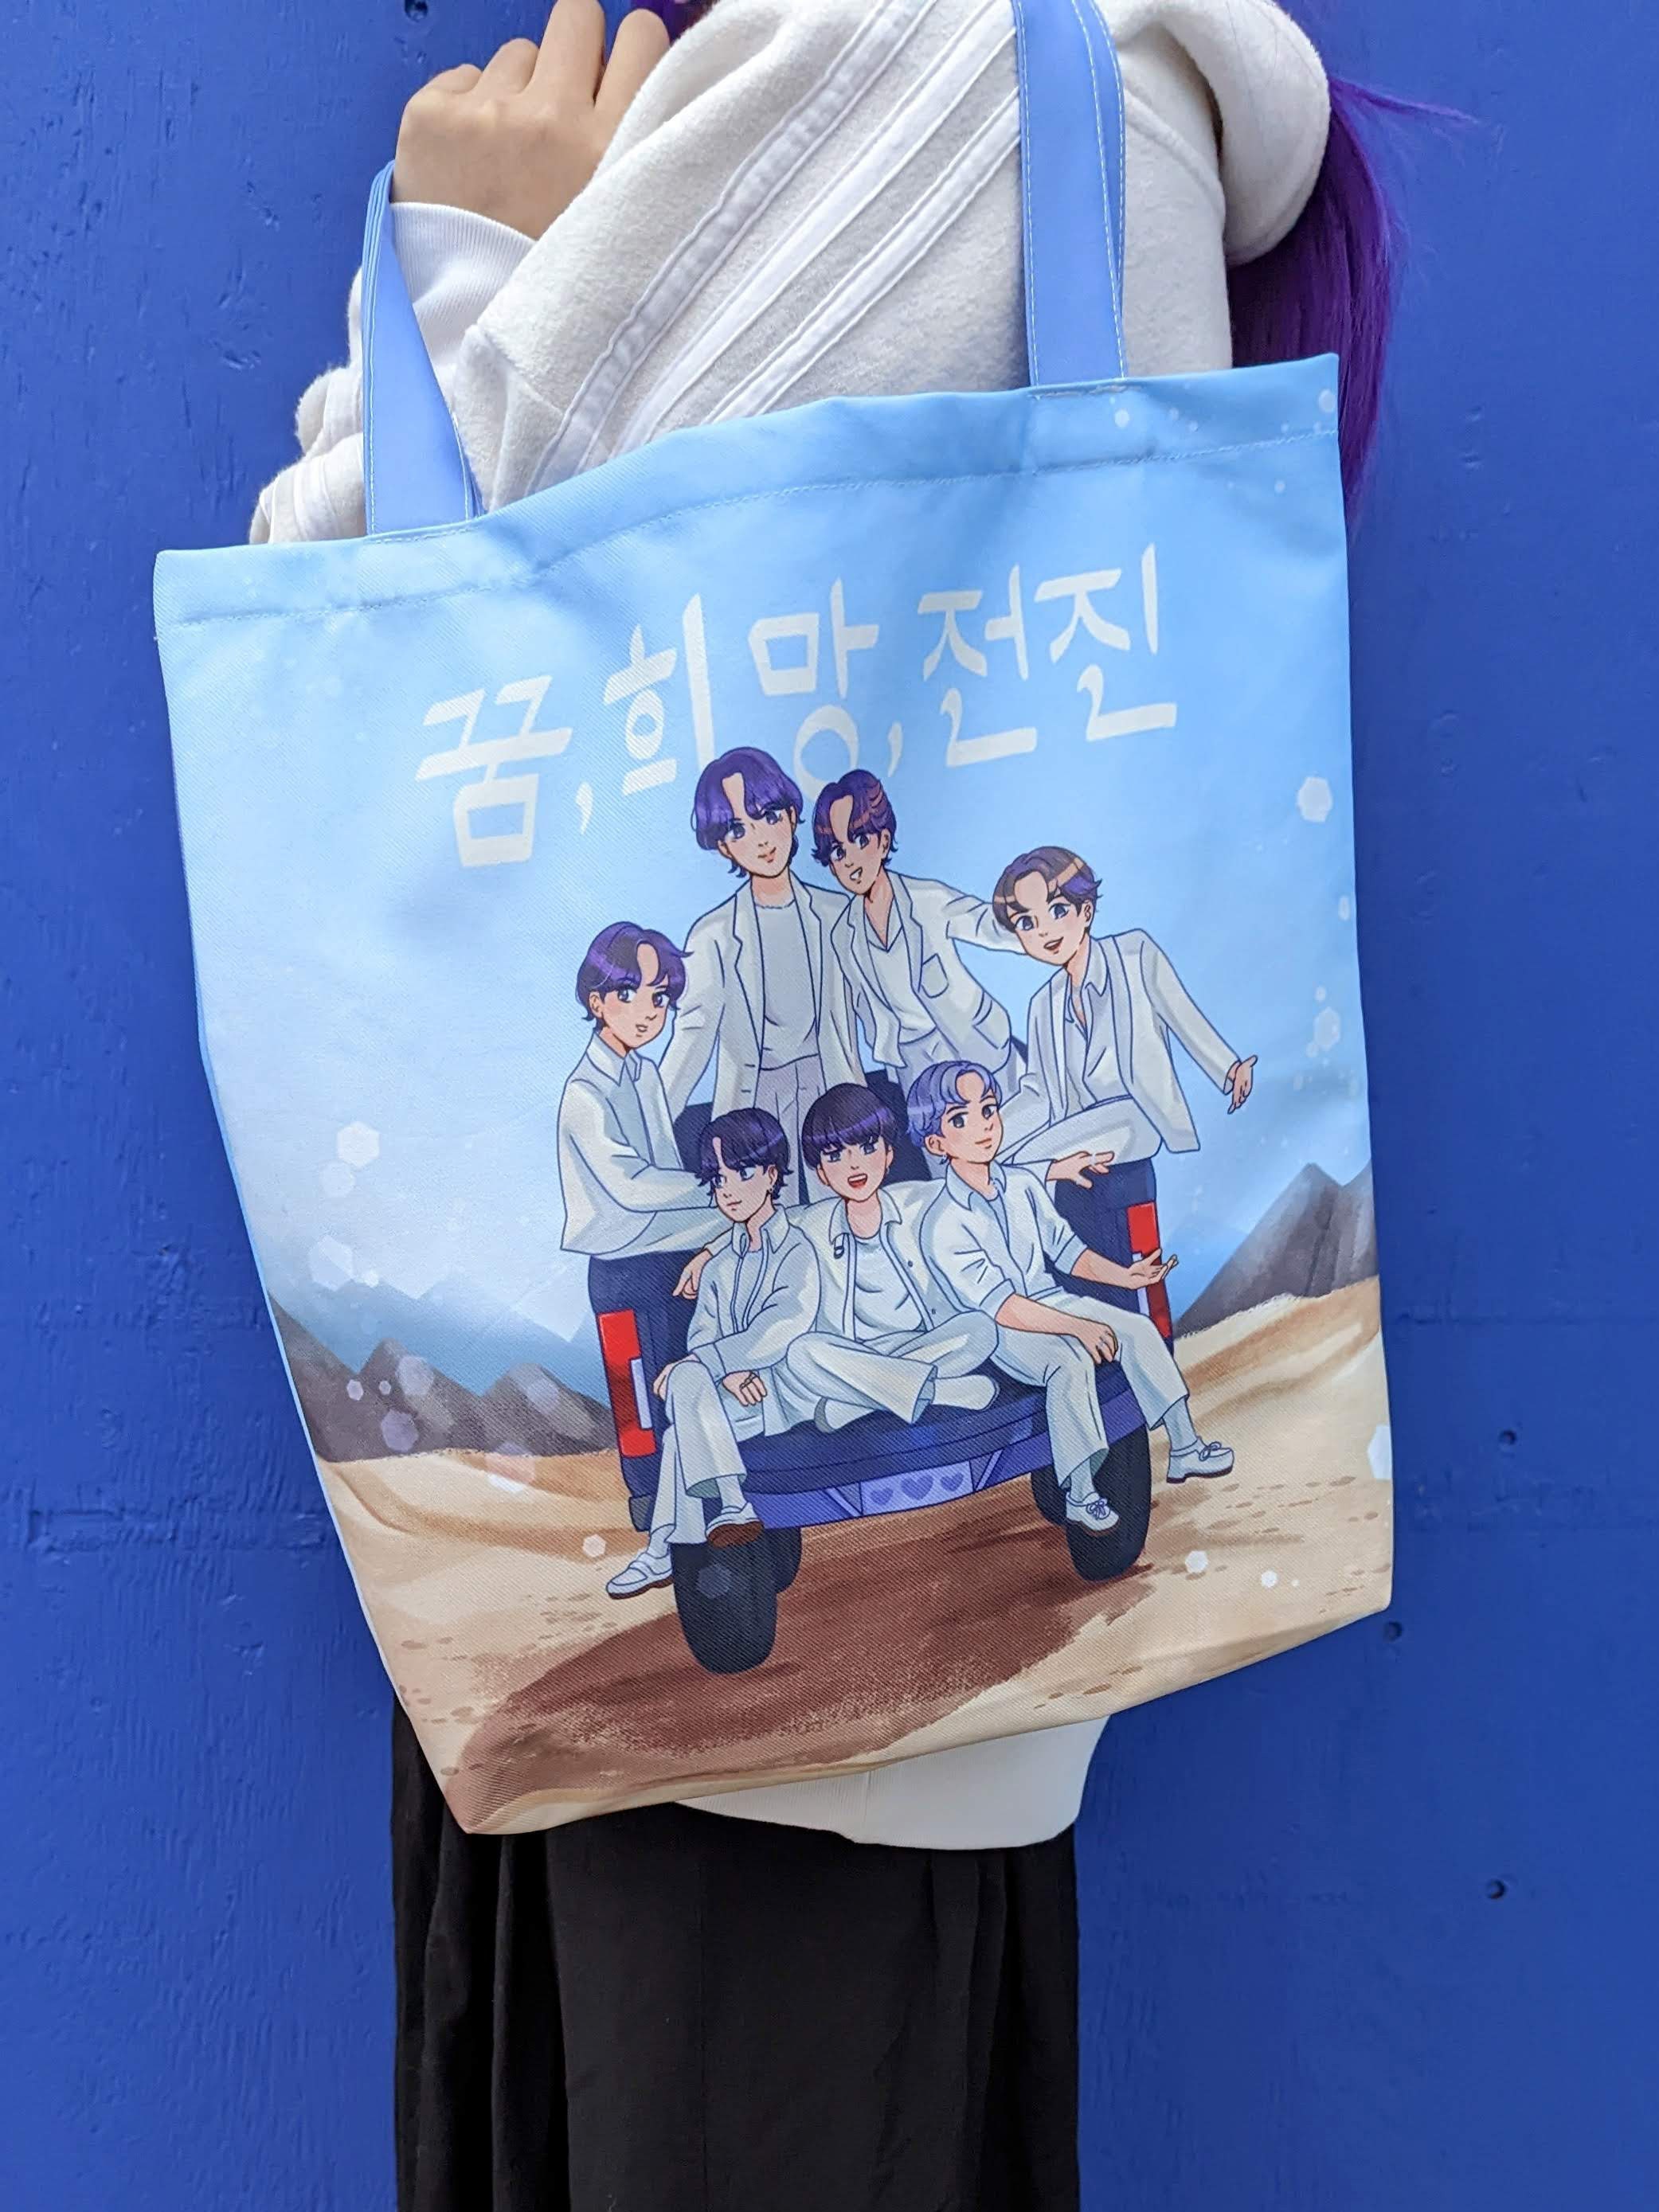 BTS Suga - Blood, Sweat and Tears Tote Bag for Sale by mishil